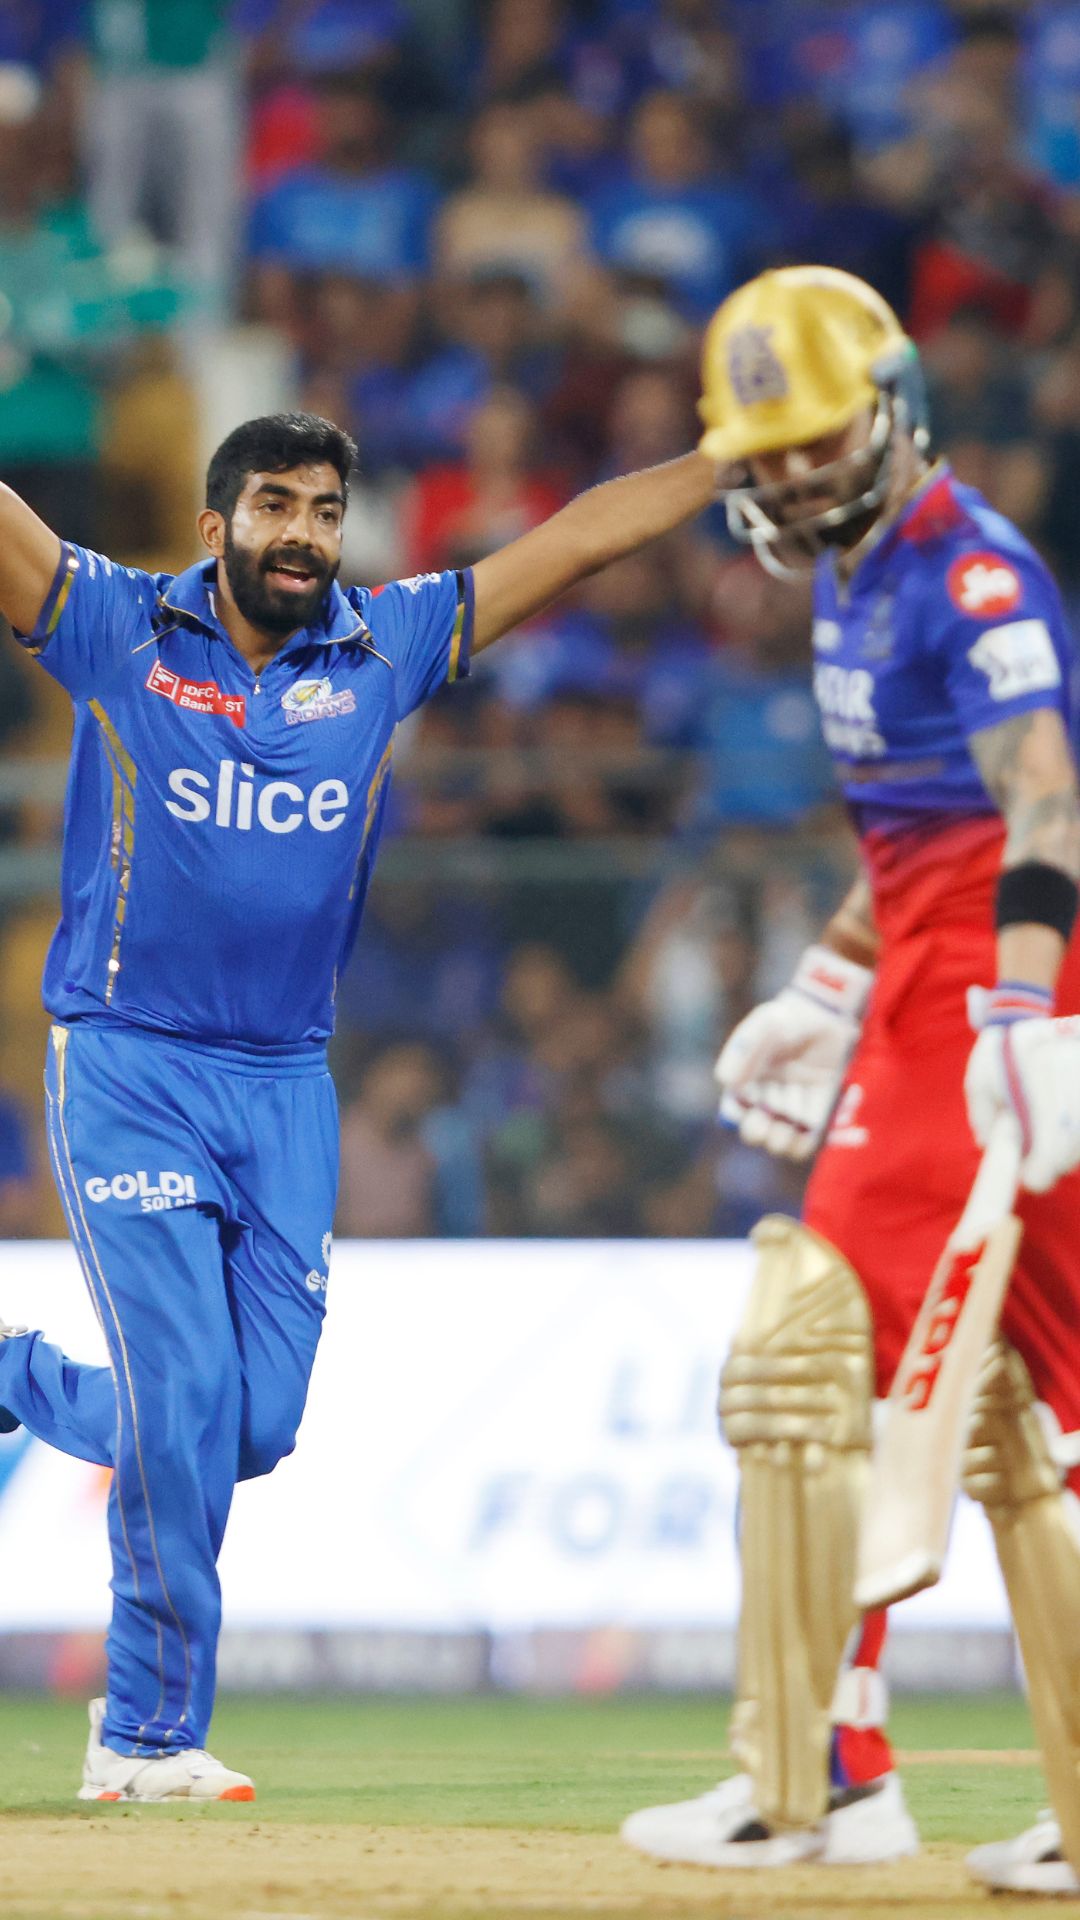 Most wickets in IPL history; Bumrah enters top 10 with Kohli's wicket